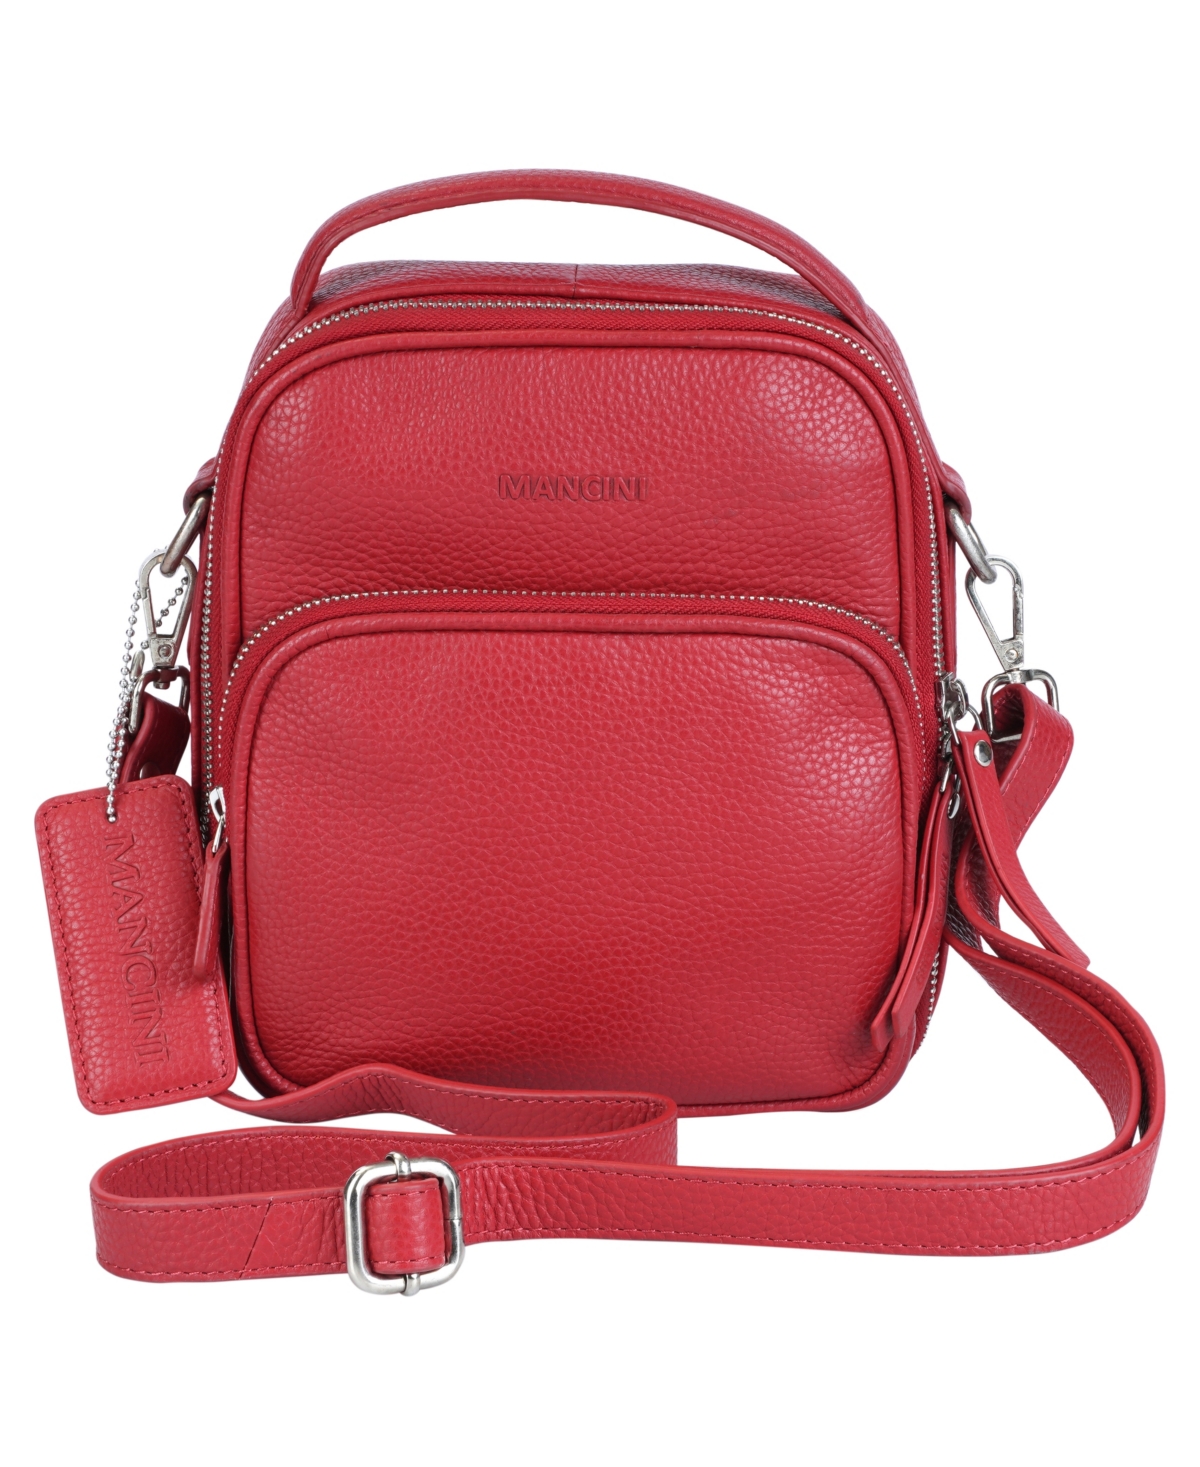 Mancini Pebbled Collection Daisy North-south Leather Crossbody Bag In Red